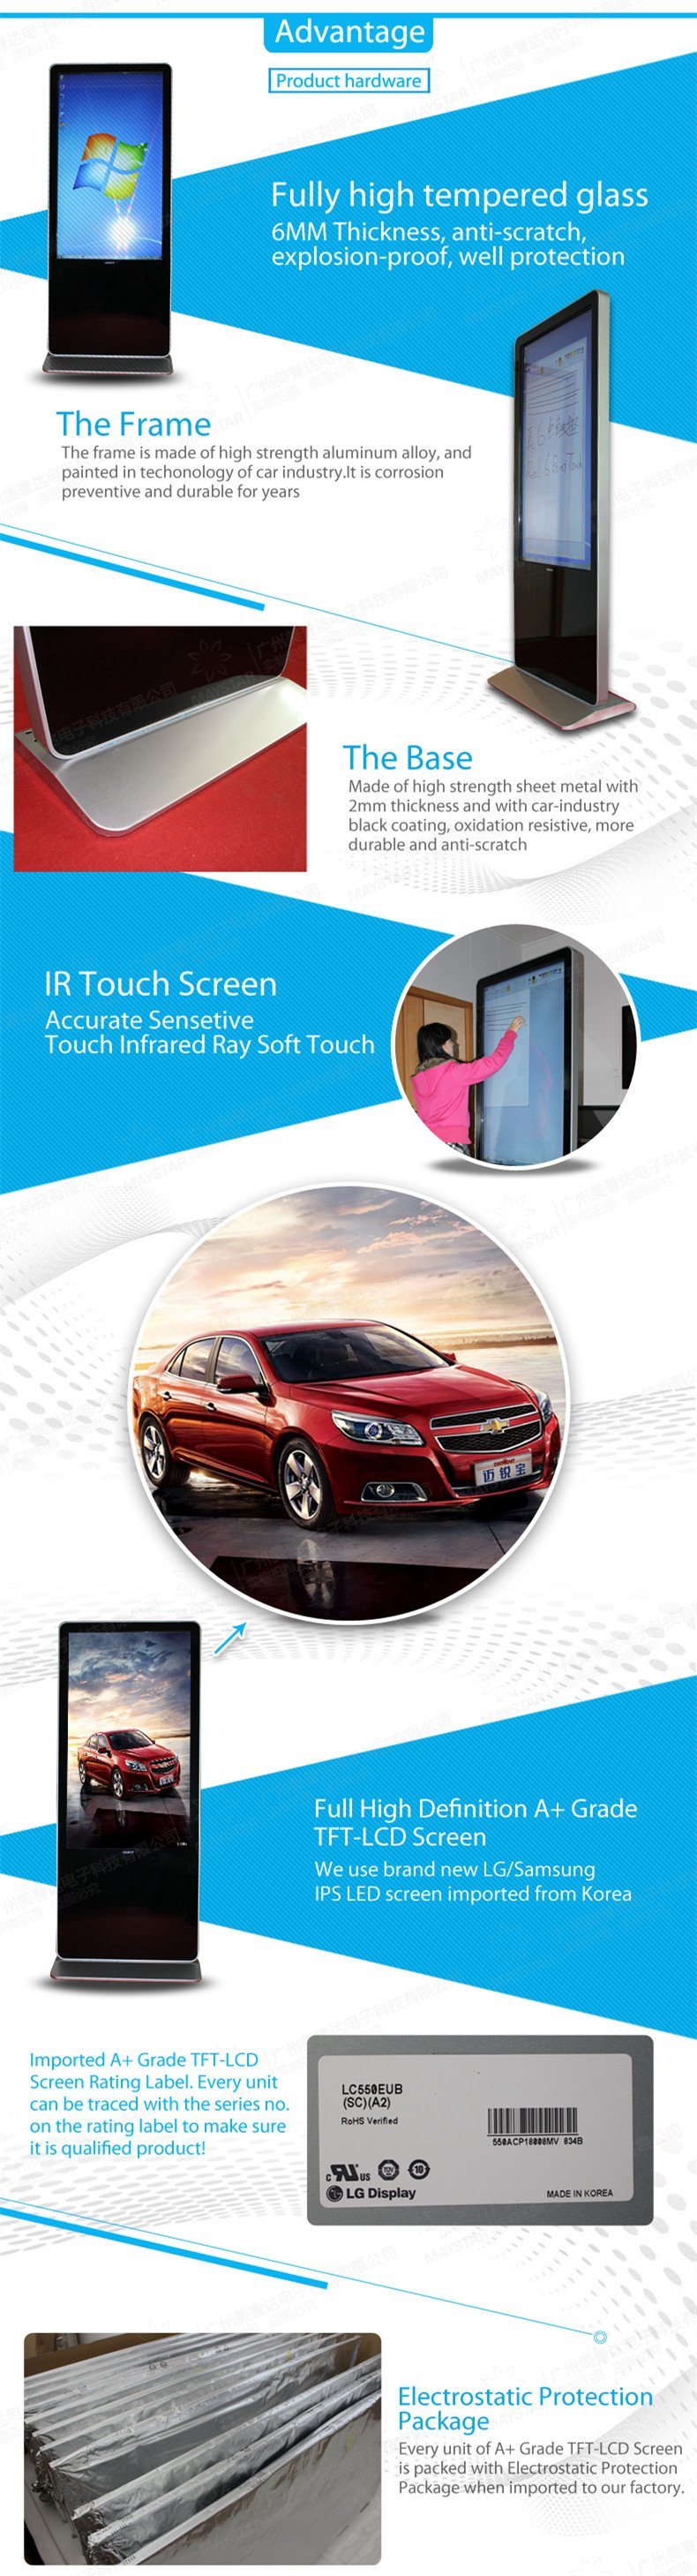 All in One PC Multimedia Information Touch Ad Display